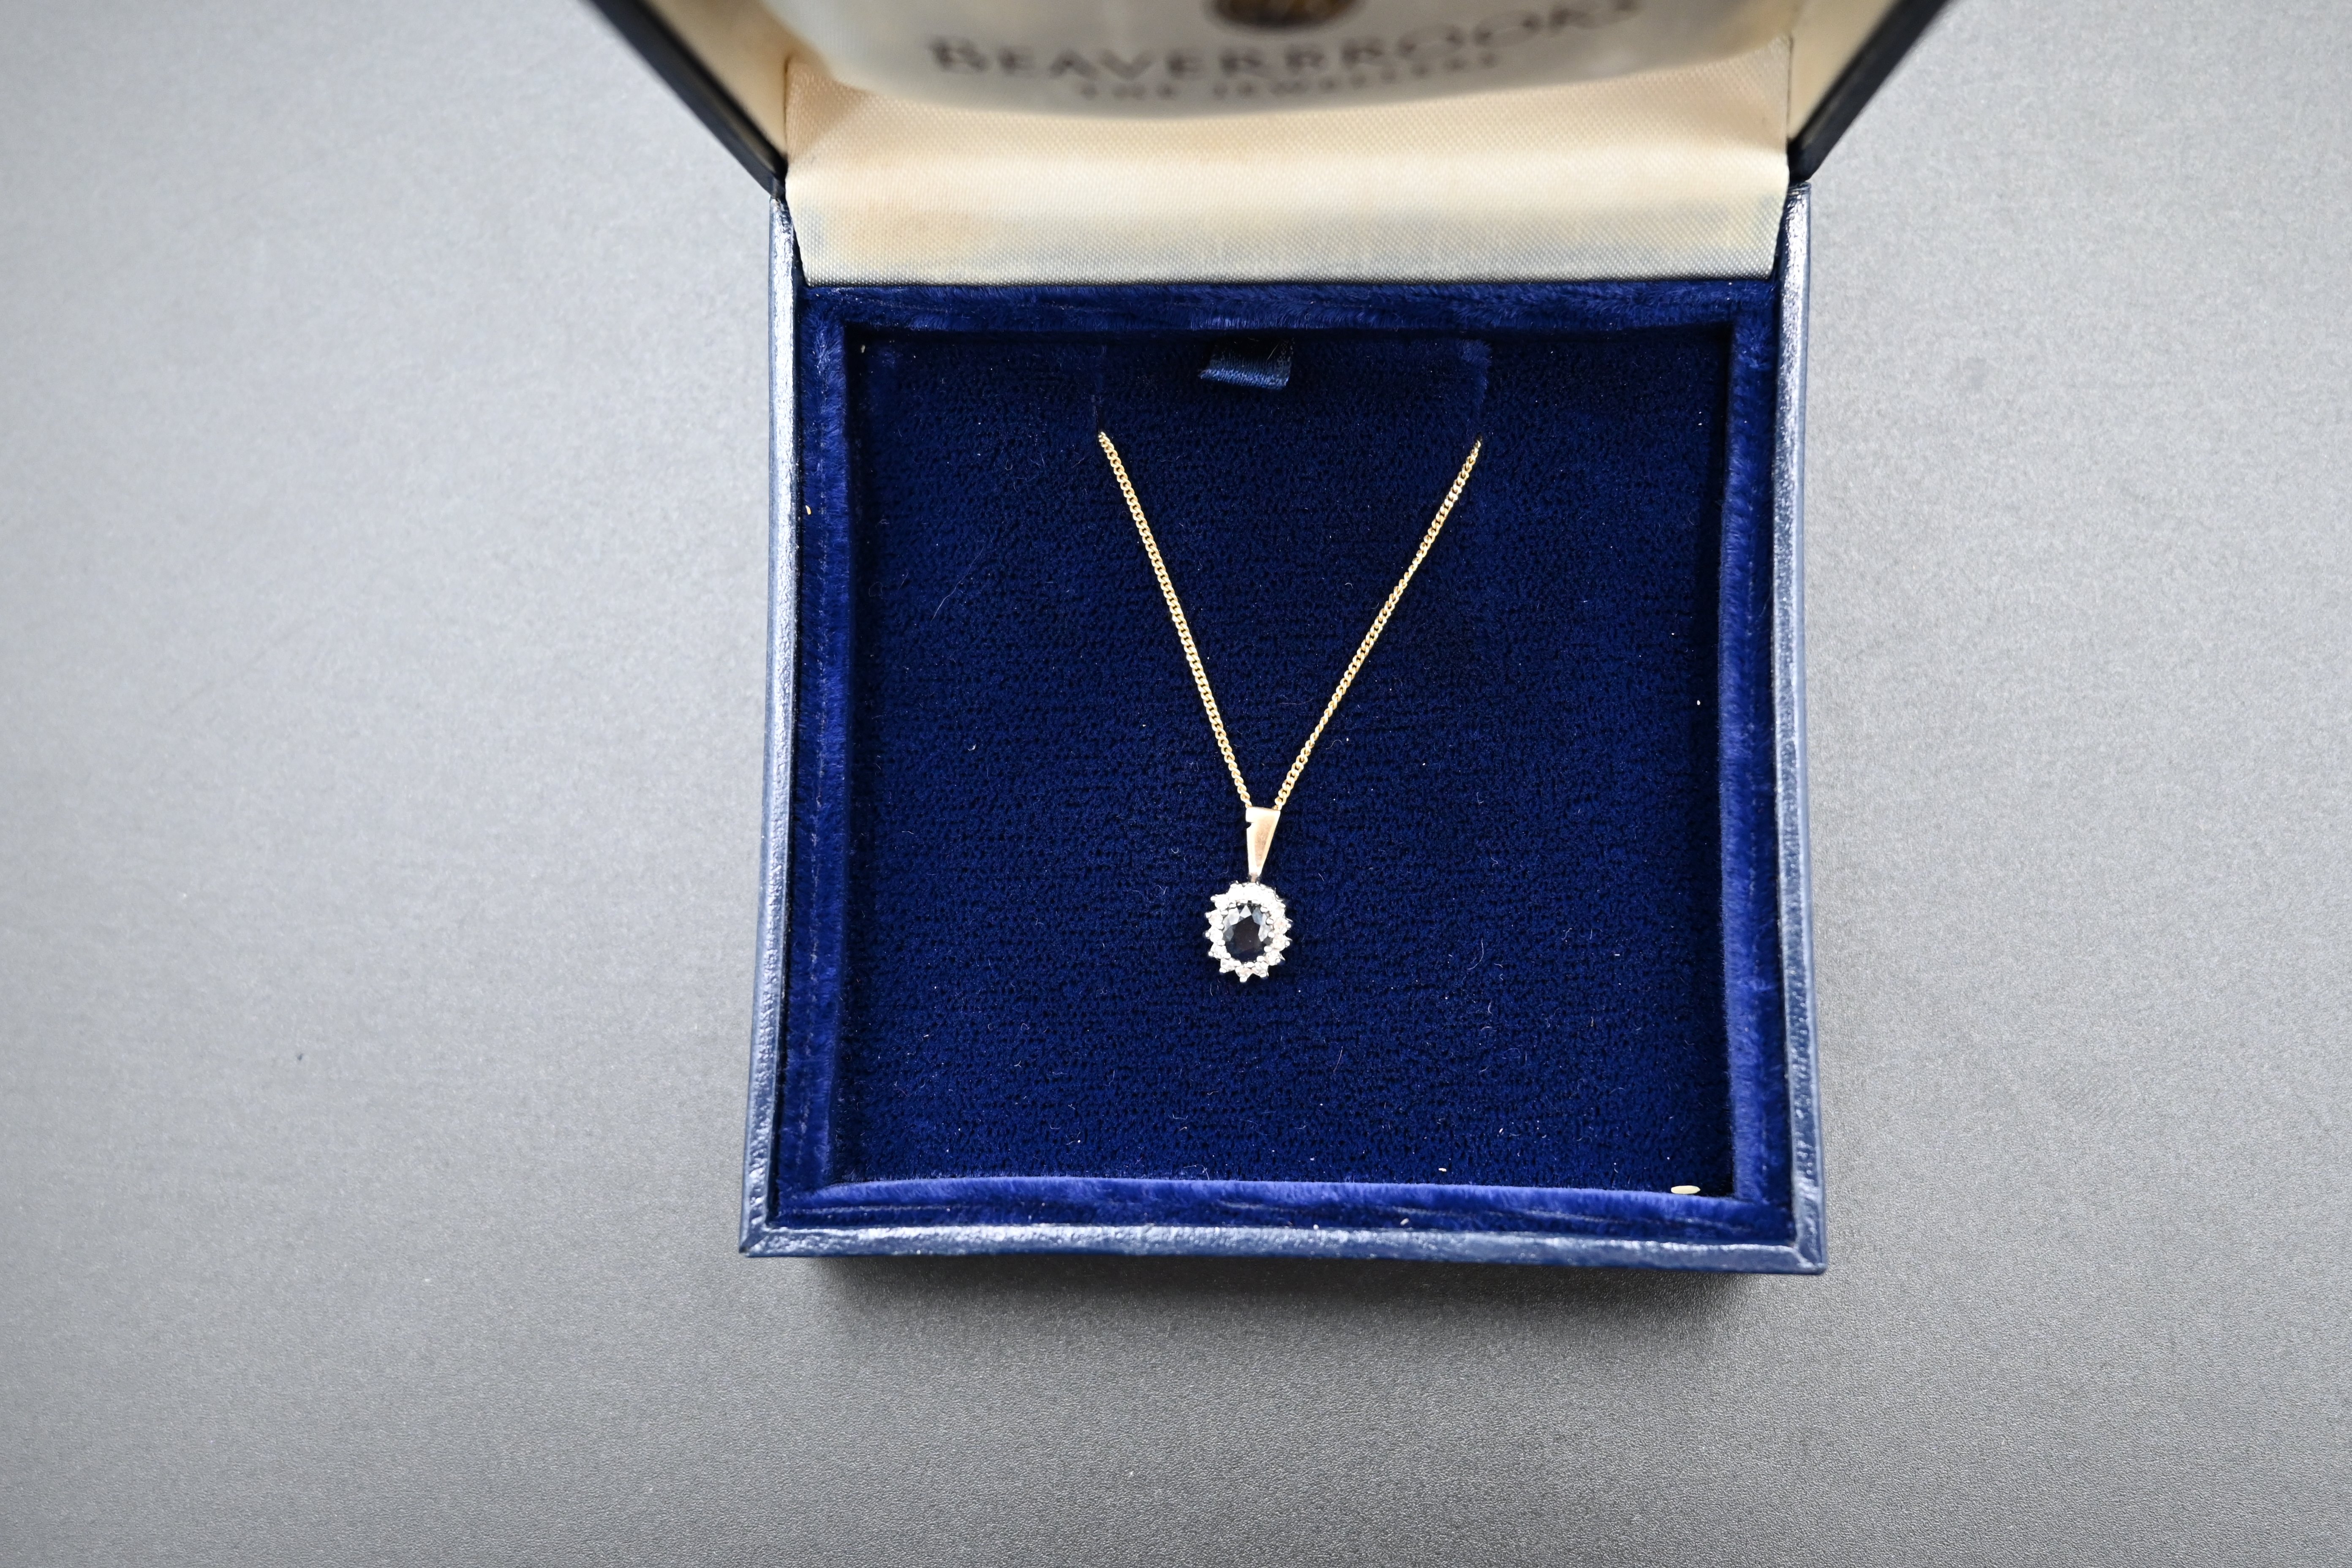 9ct diamond and sapphire (stud earrings) and pendant set (boxed) total weight 4.08g - Image 2 of 4